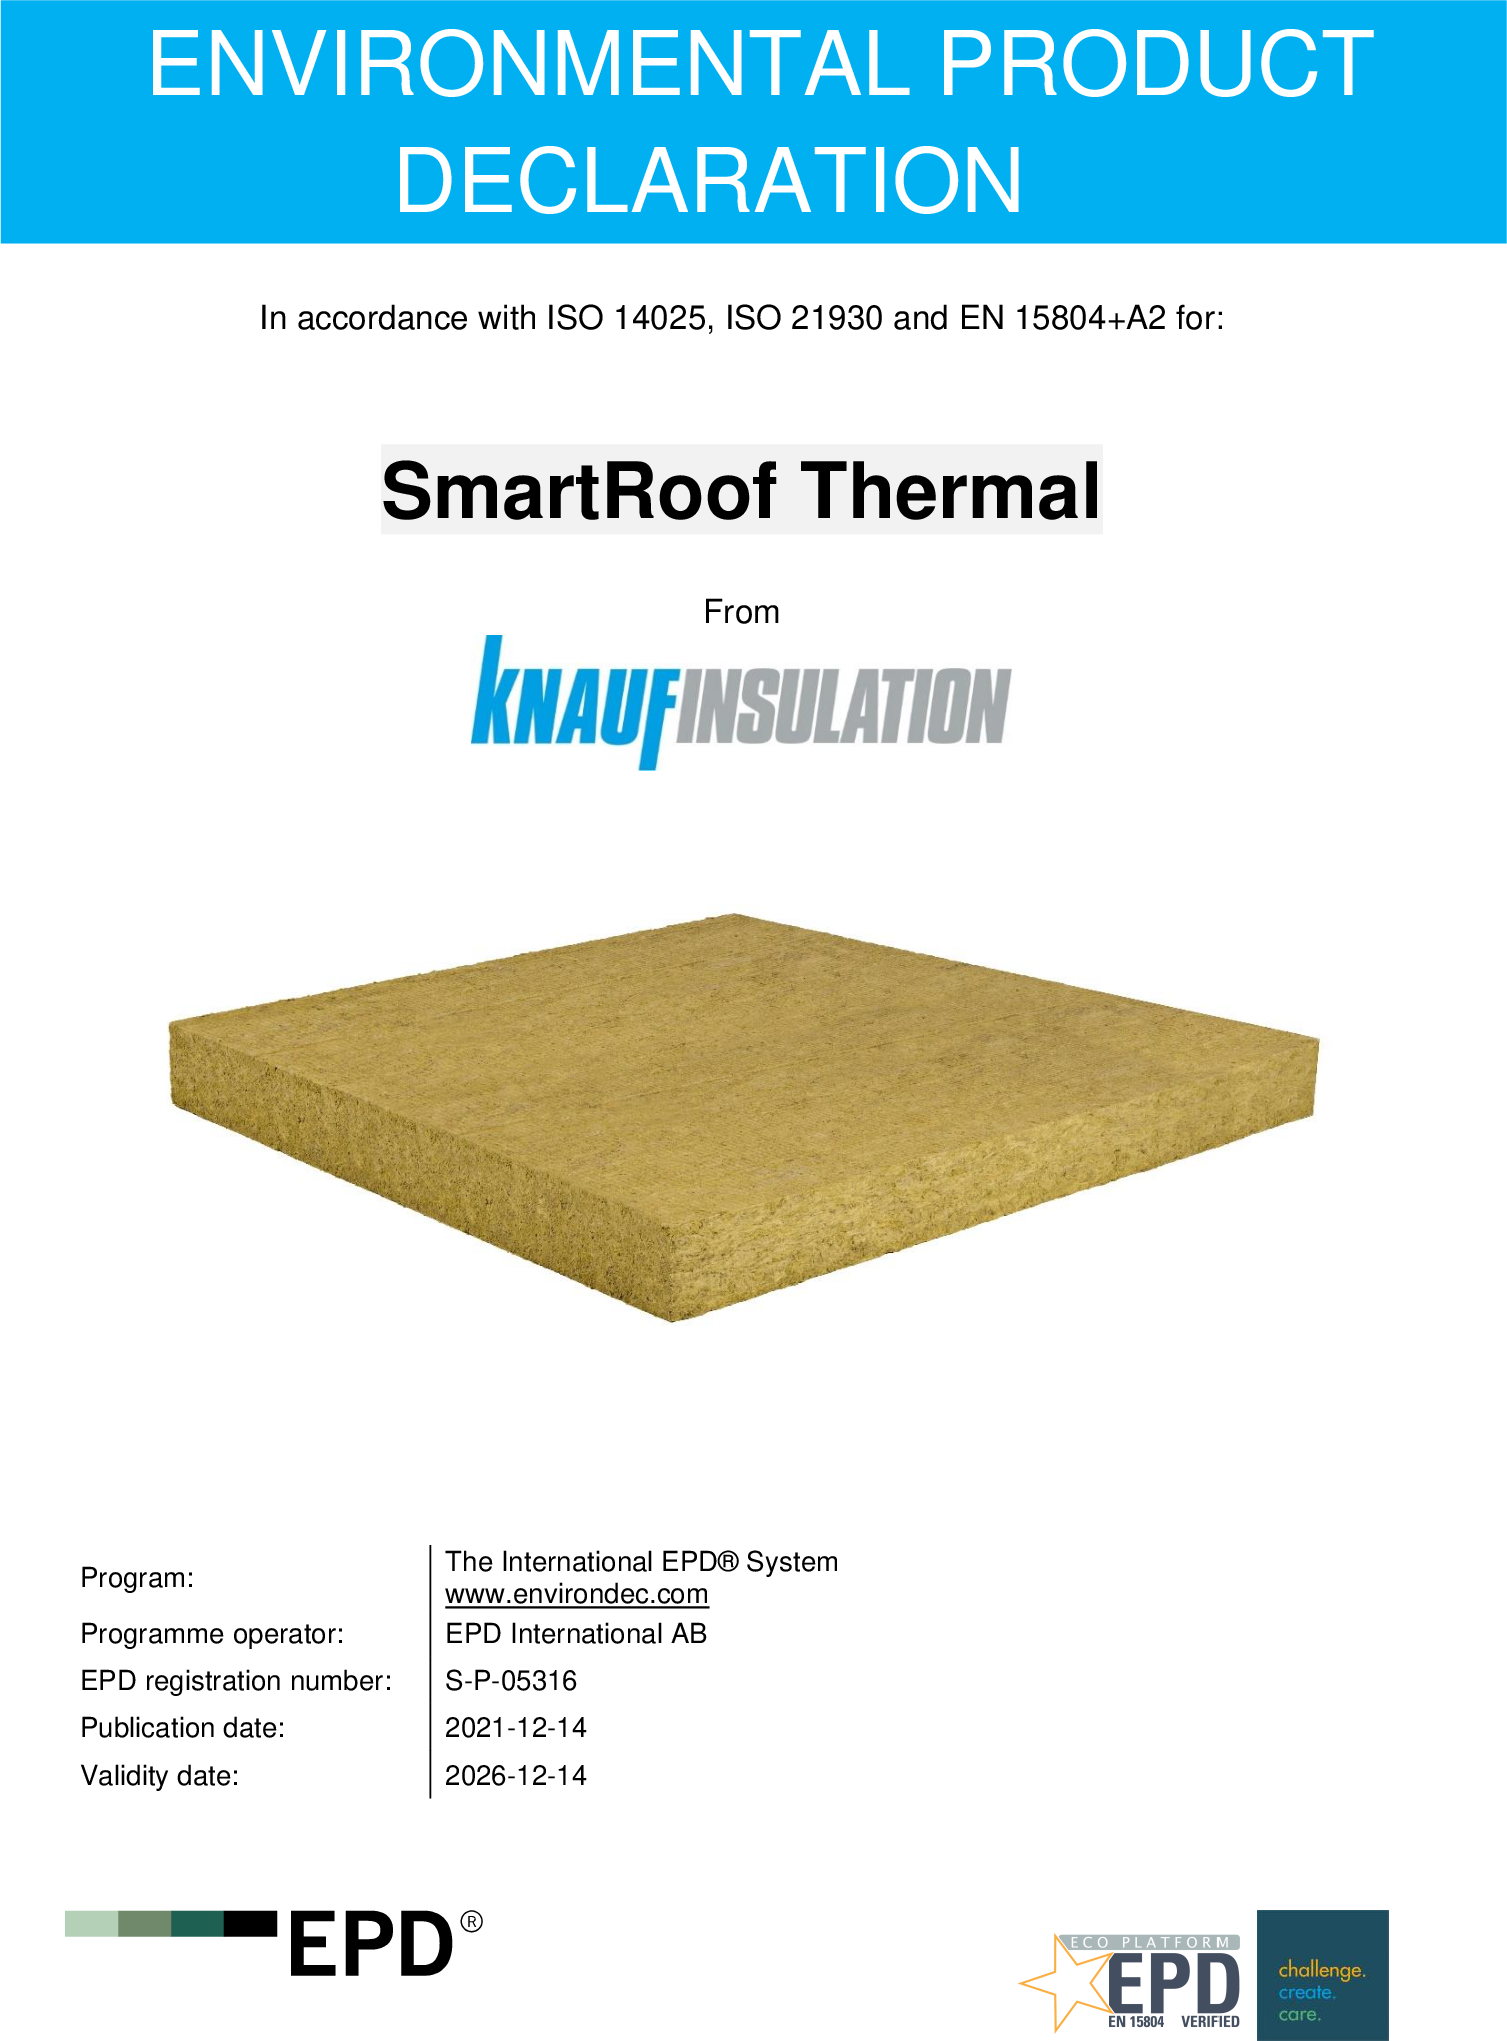 SmartRoof Thermal